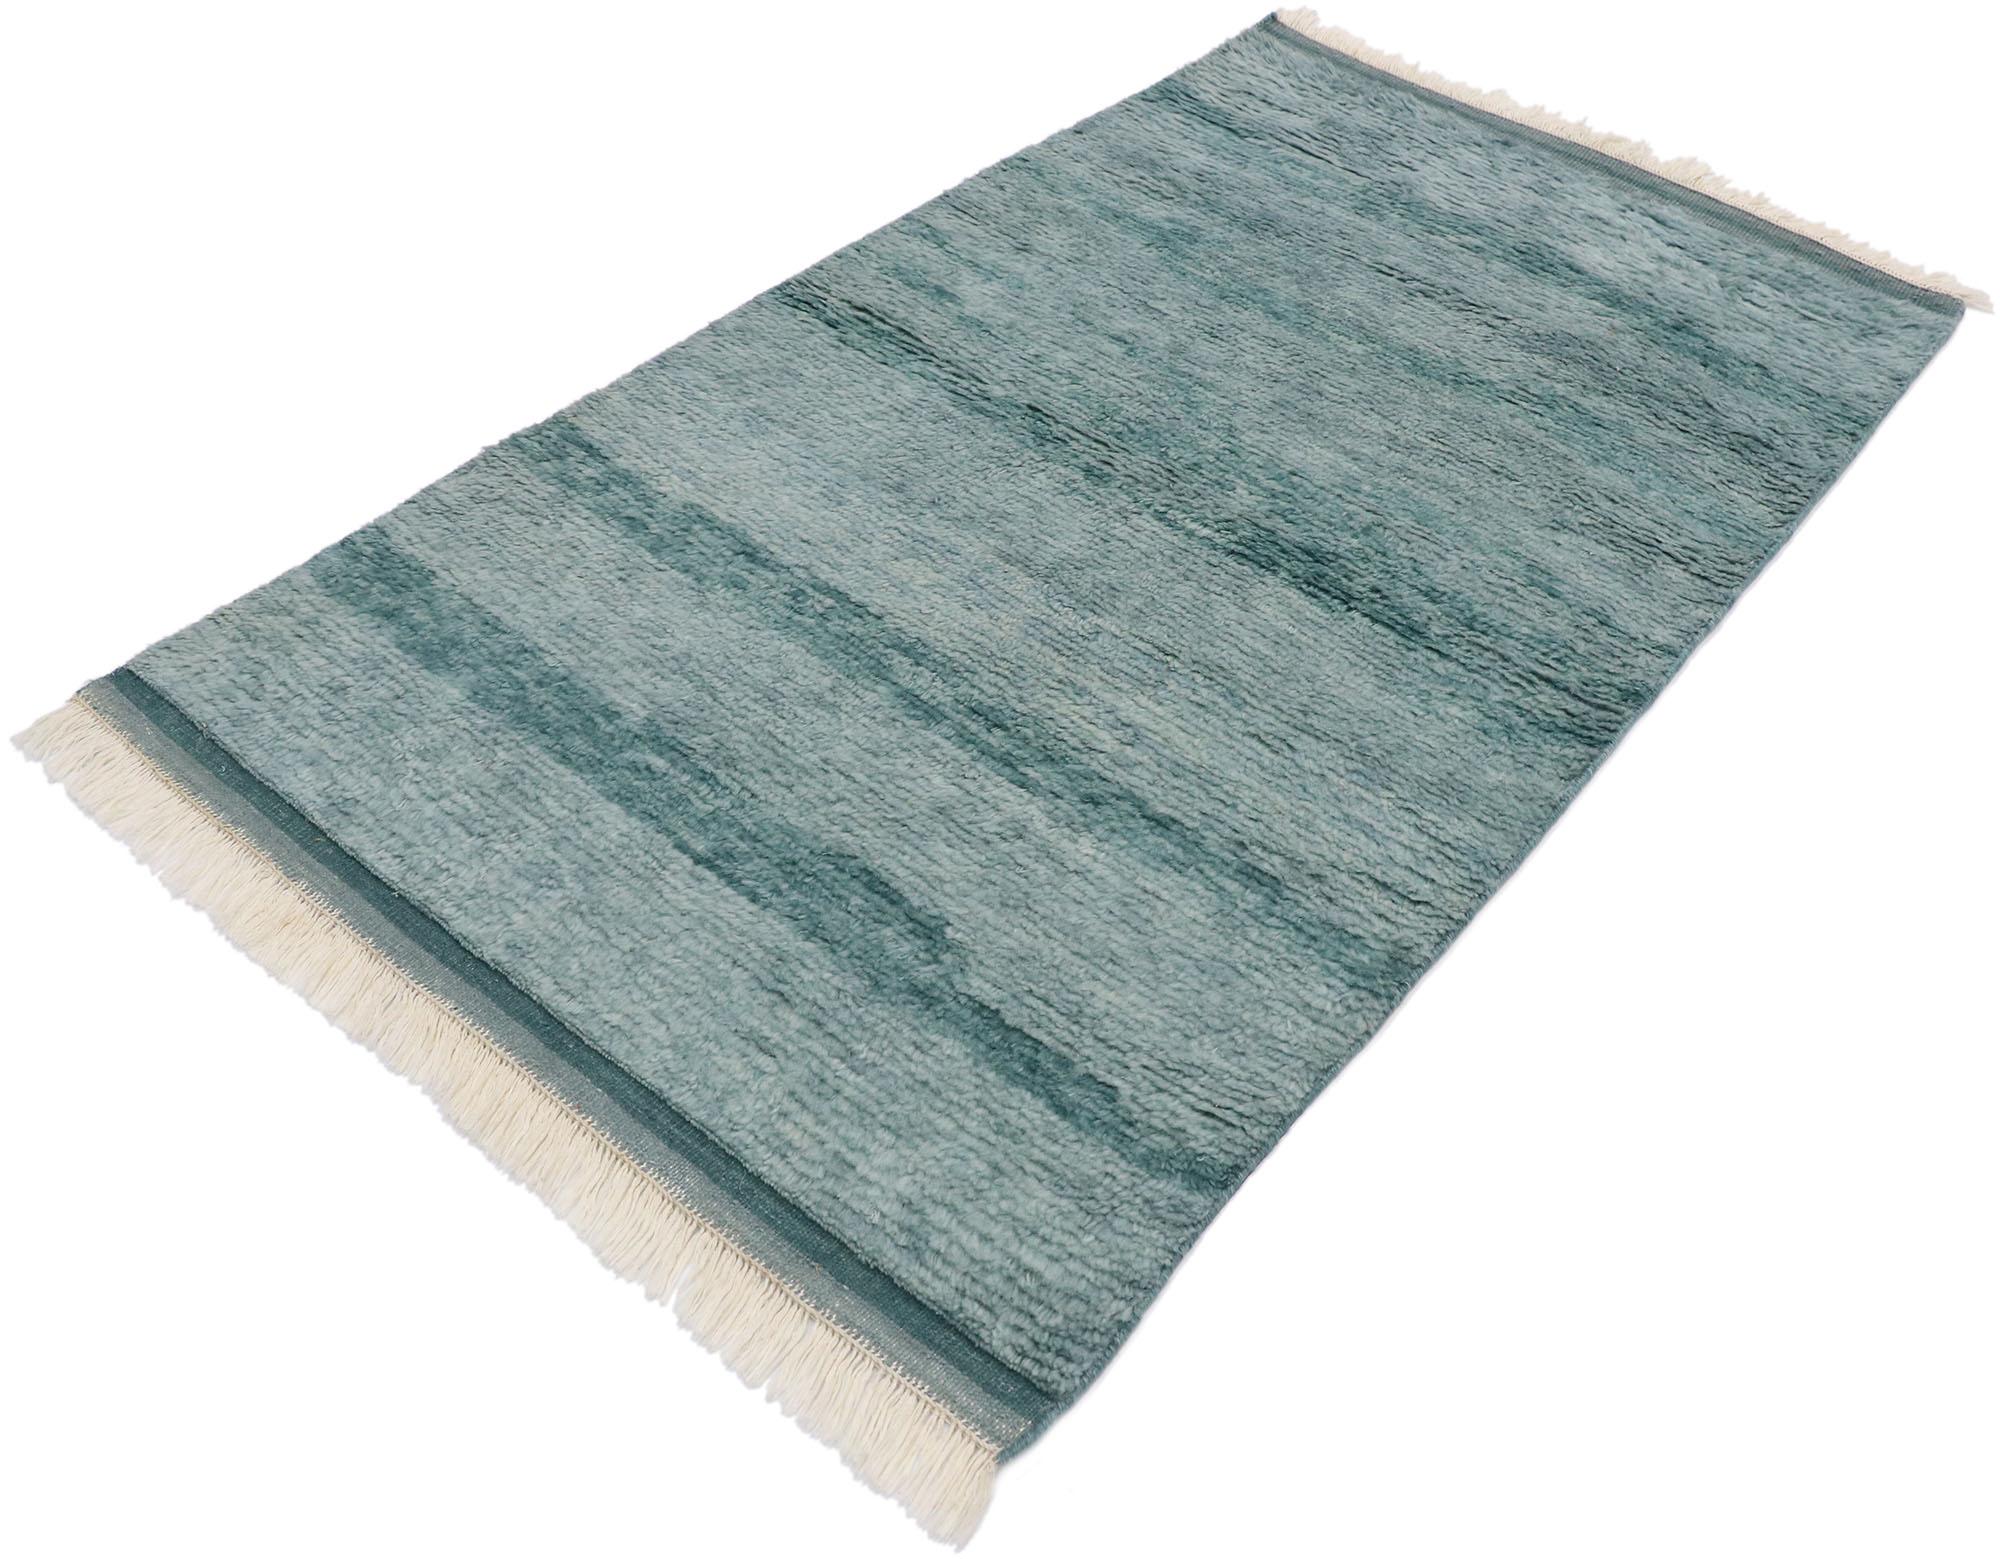 30607, New Contemporary Moroccan Style Rug with Modern Expressionist Design 02'11 x 05'02. This hand knotted wool contemporary Moroccan rug features a luminous aqua toned color palette and wonderfully soft pile. Waves of abrash and ombre movements